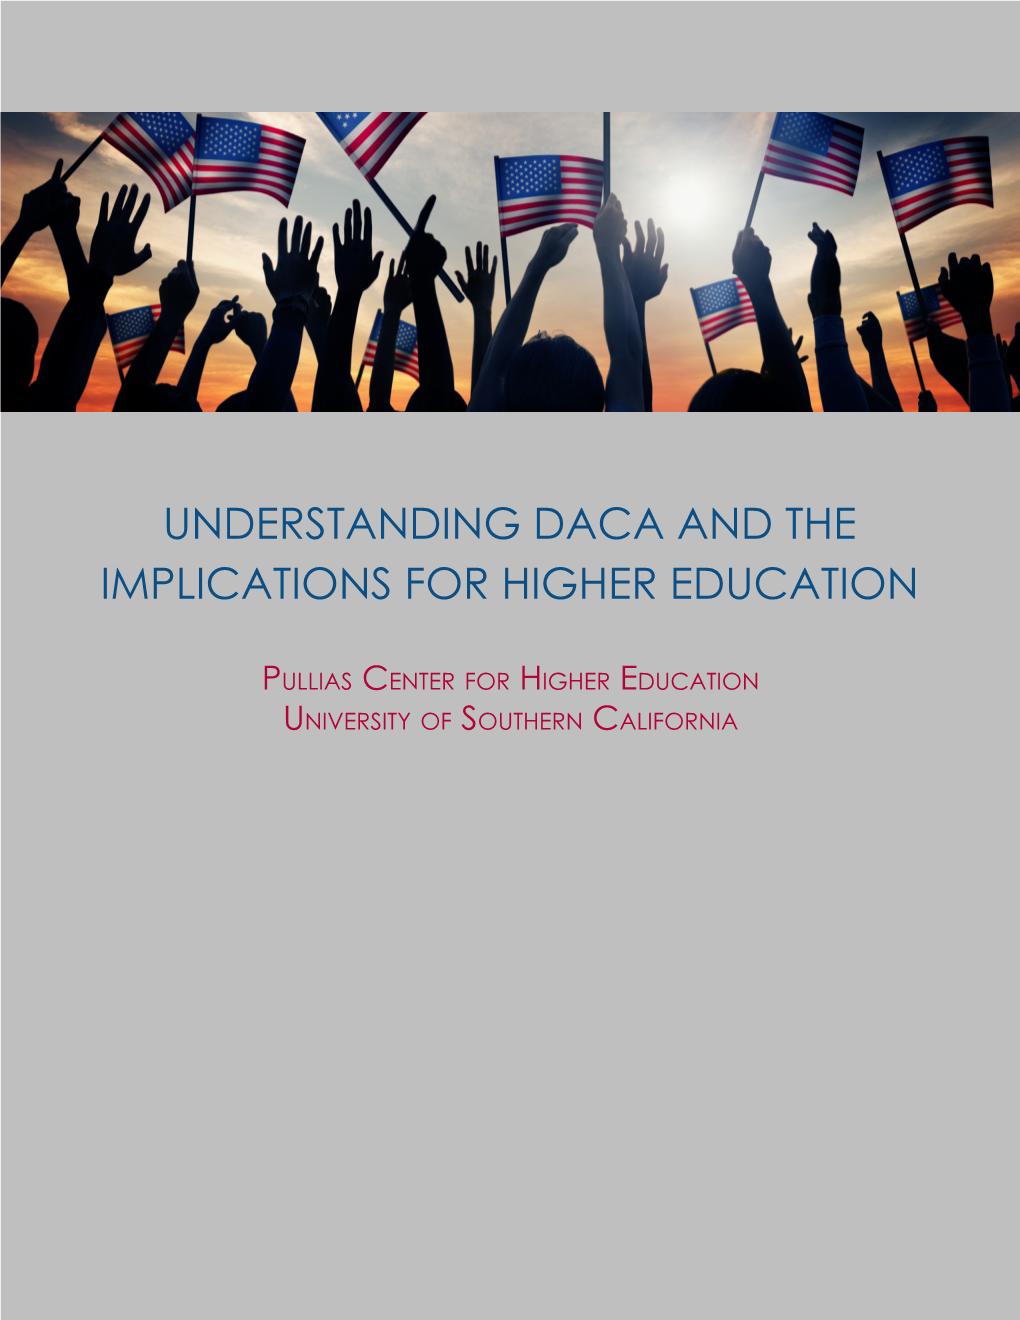 Understanding Daca and the Implications for Higher Education